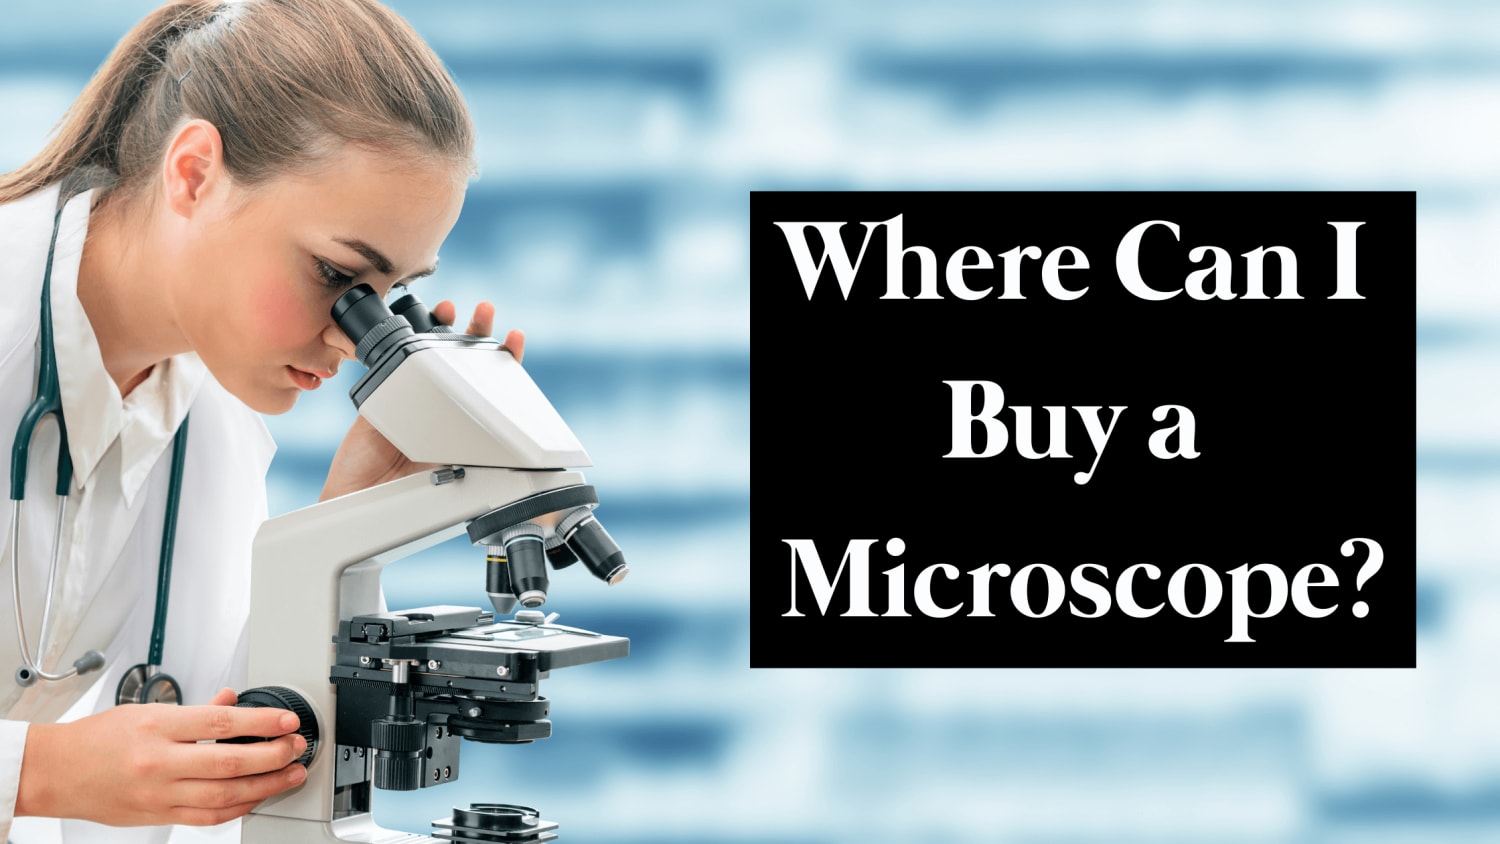 Where Can I Buy a Microscope? - Microscope Manufacturer & Supplier